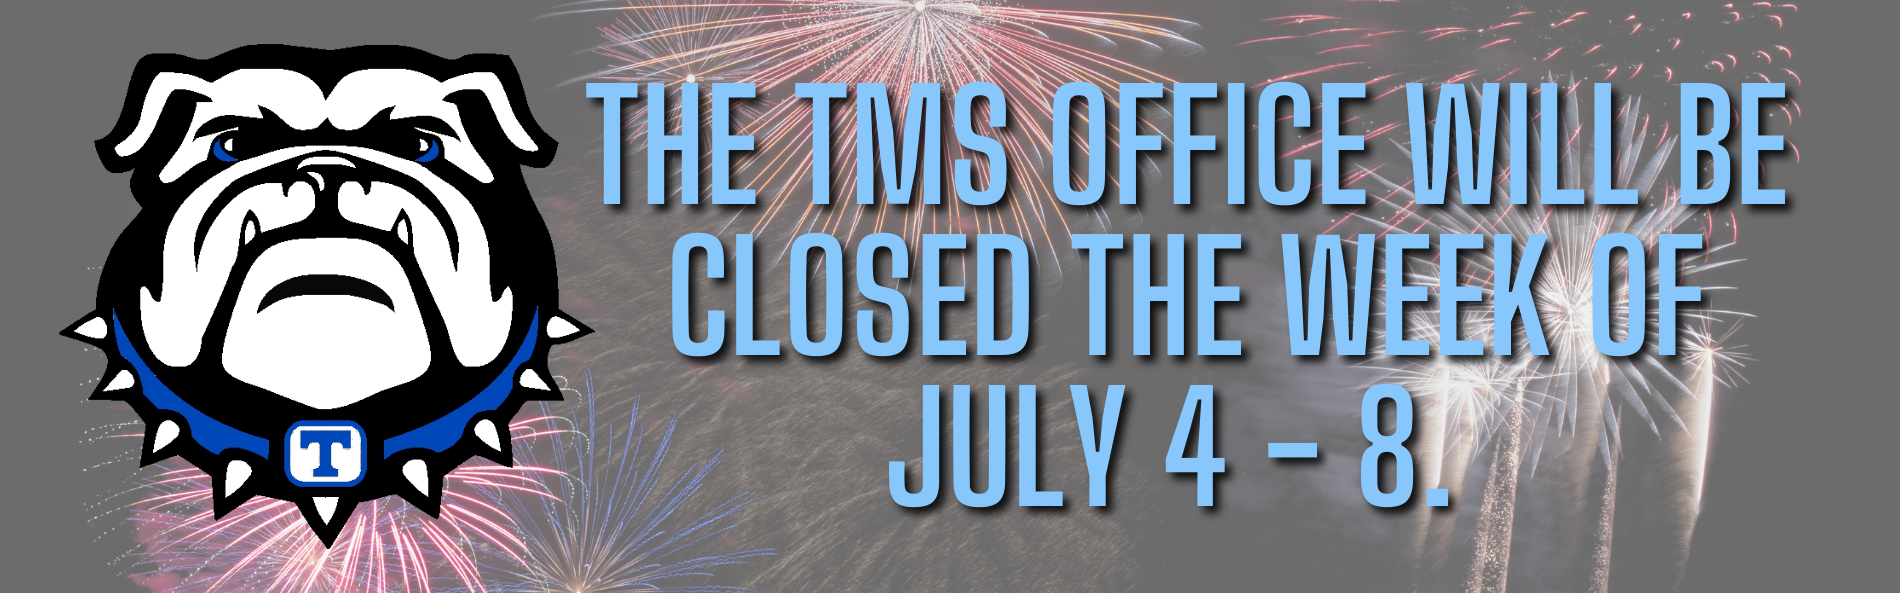 Office closed 7/4 - 7/8